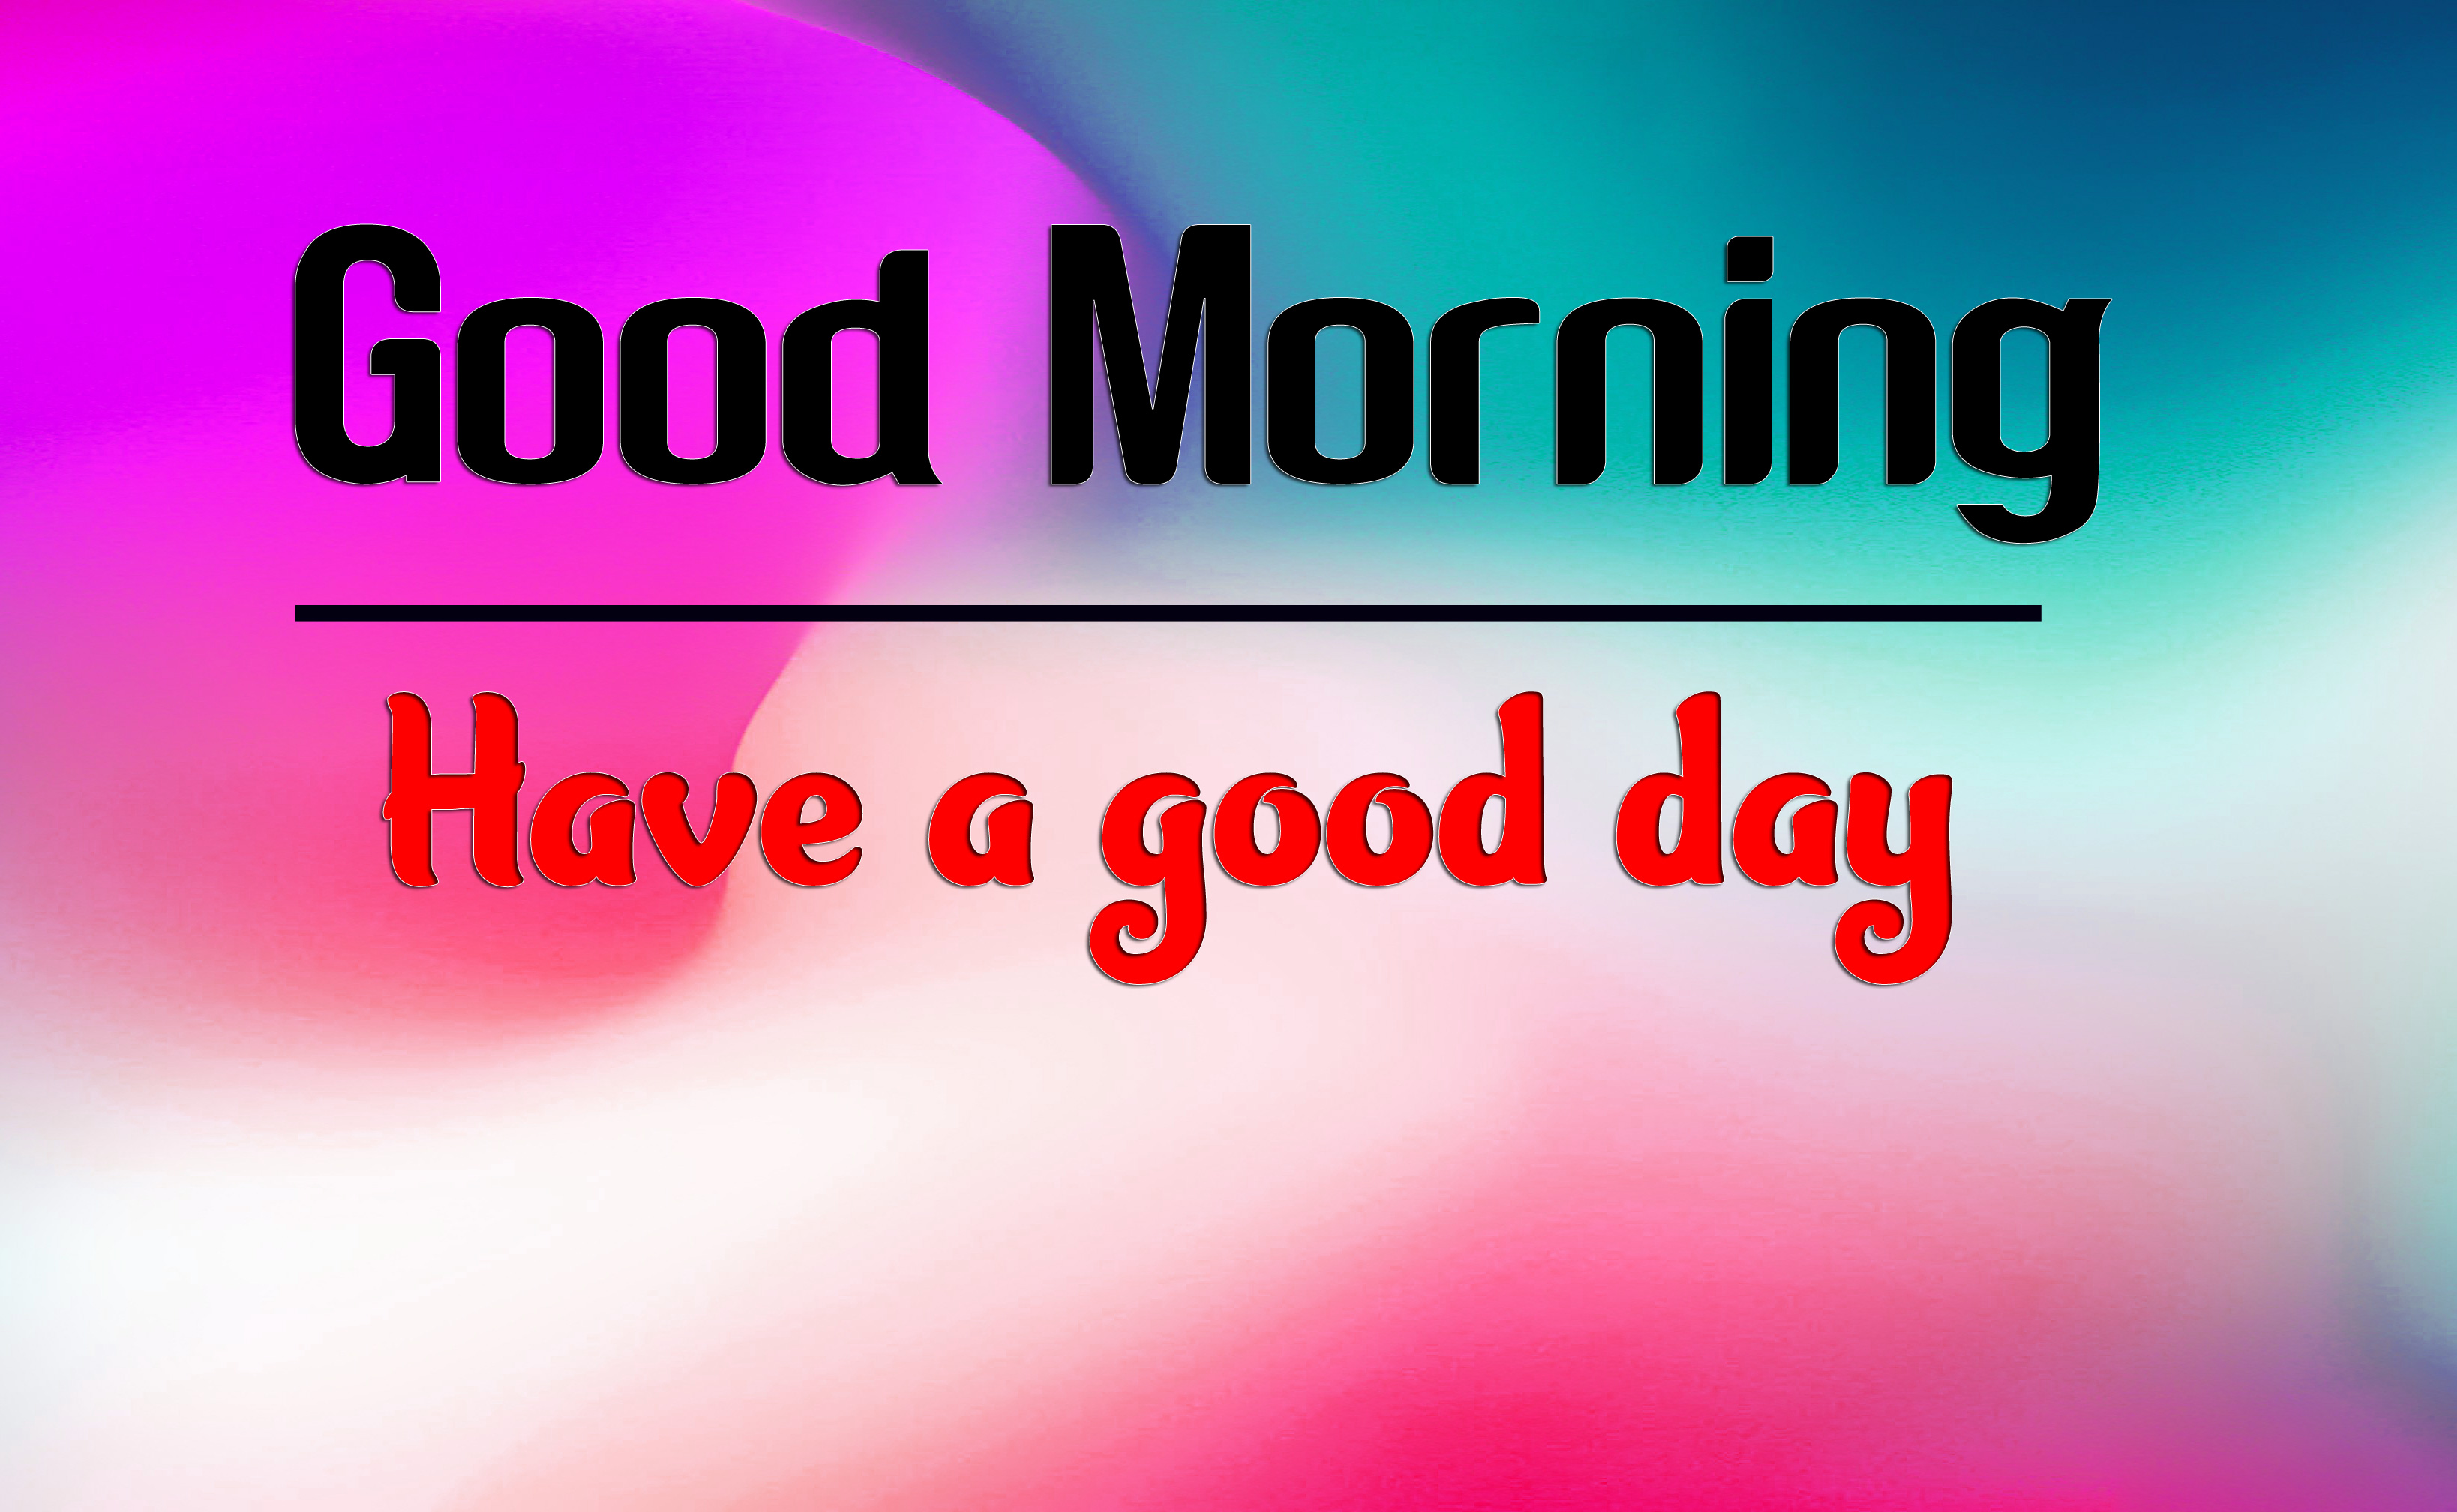 Good Morning 4k HD Images HD Pics Pictures Free Download 